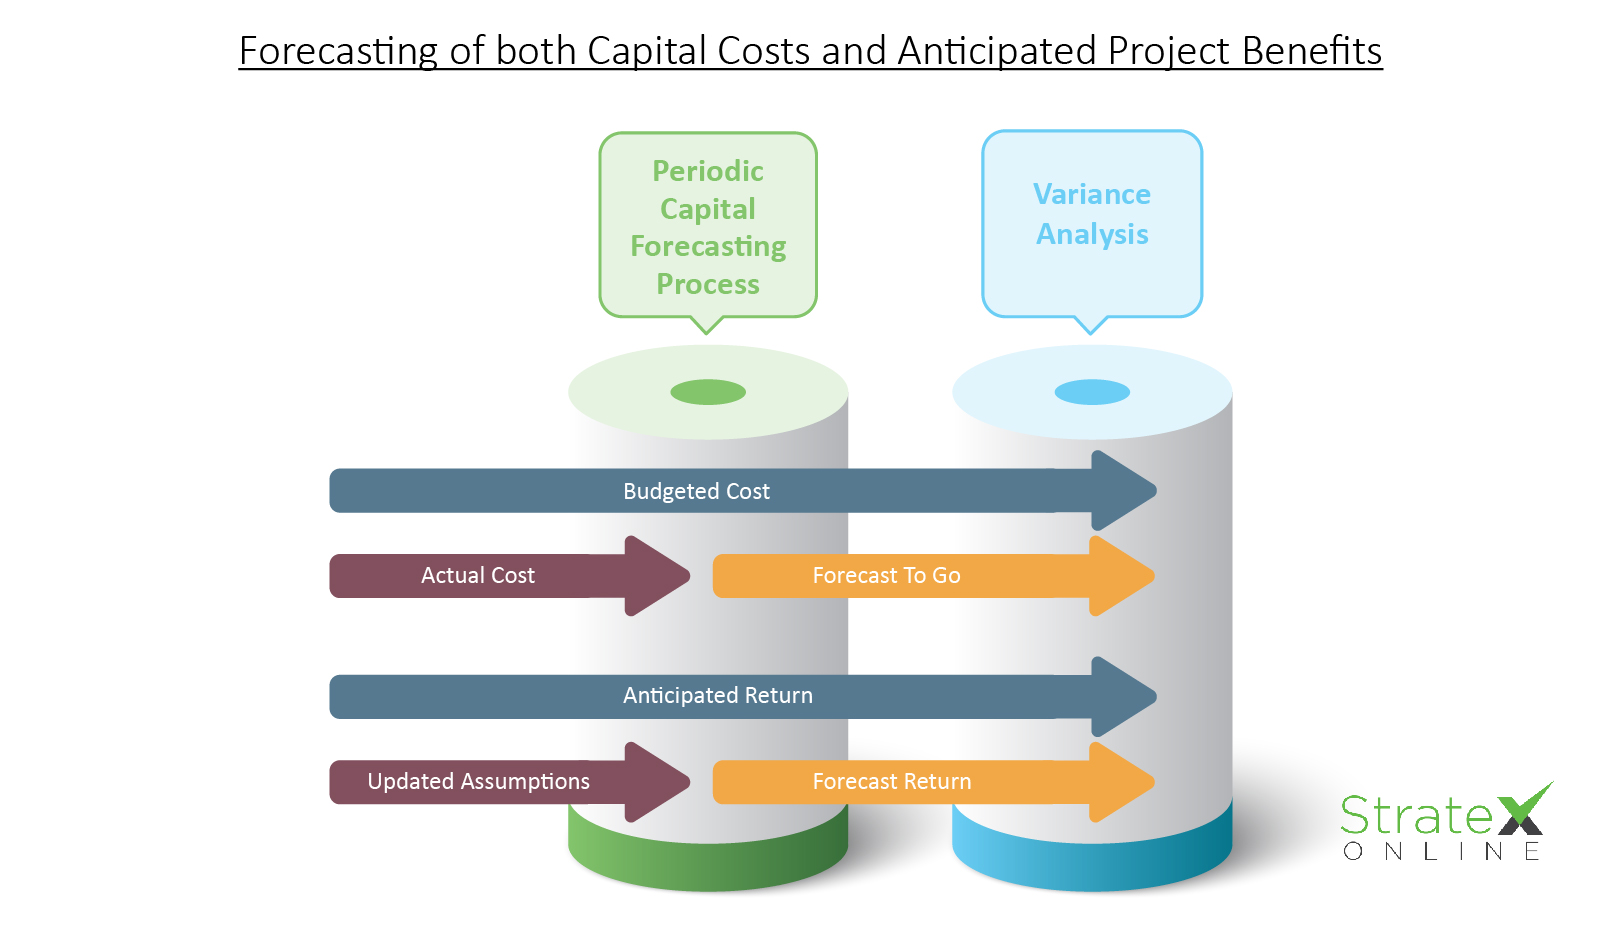 Forecasting of both capital costs and anticipated project benefits for effective FP&A